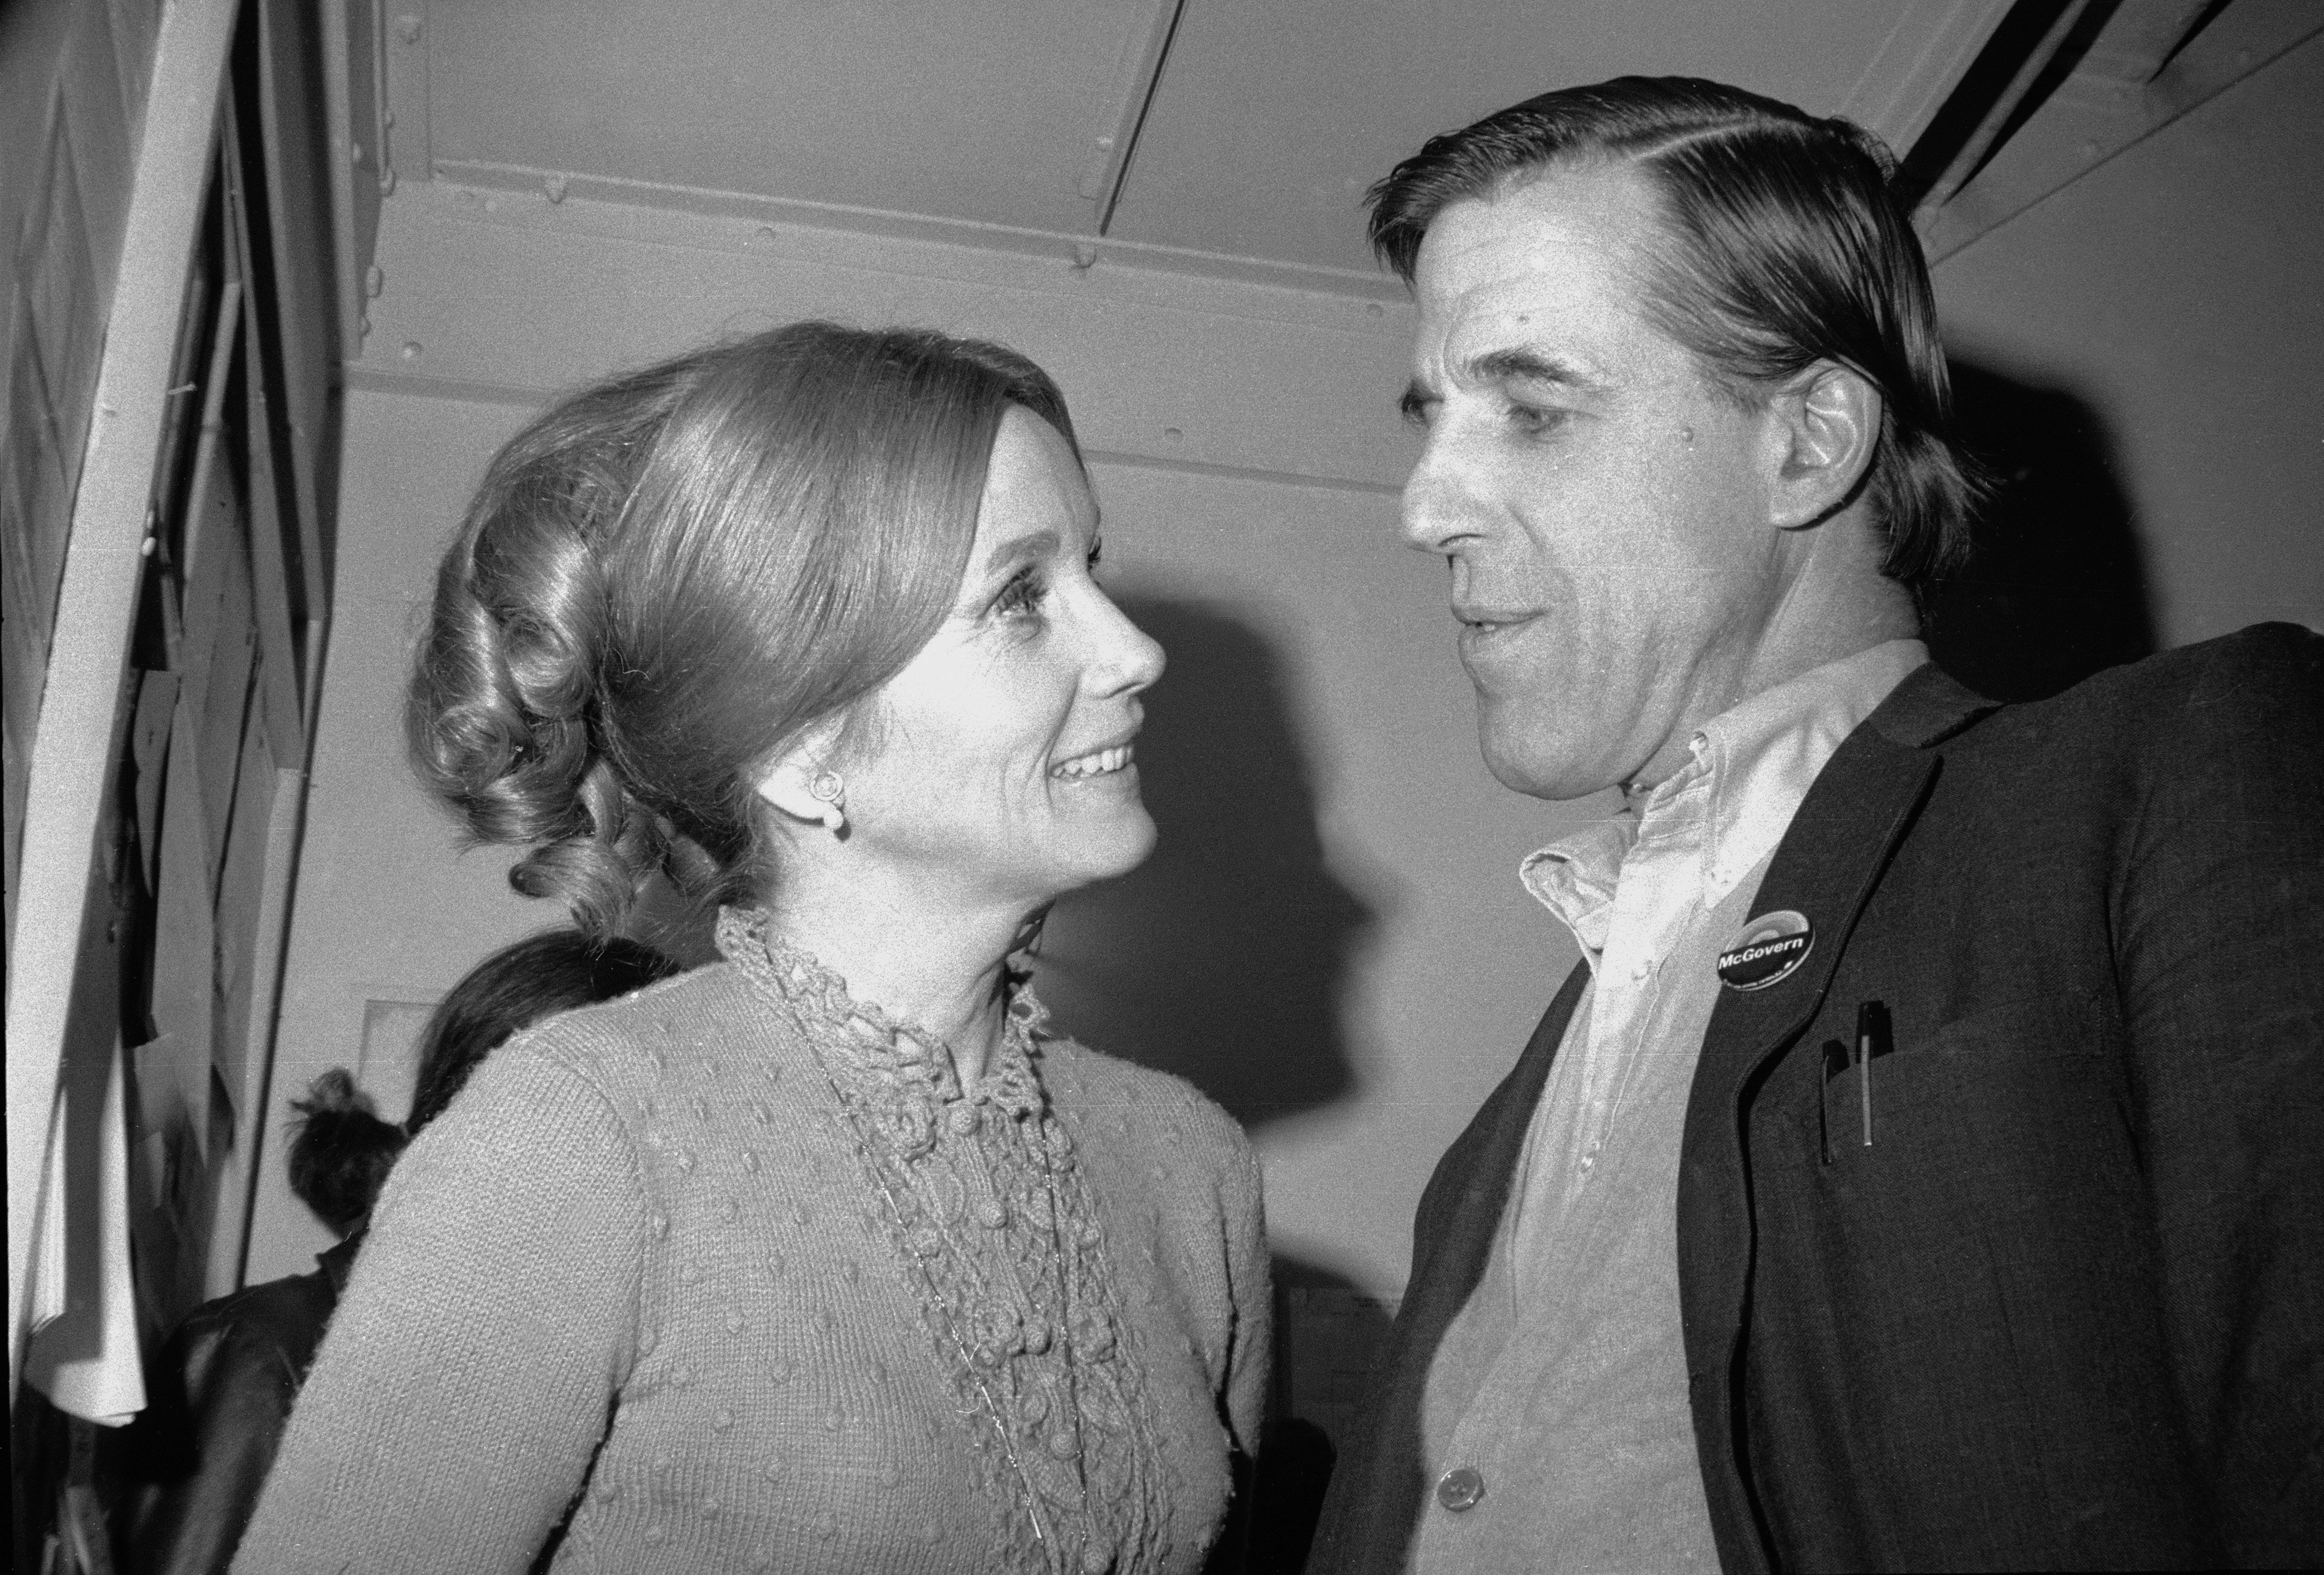 Eva Marie Saint and Fred Gwynne (1926 - 1993) talk together in the early 1970s. I Source: Getty Images